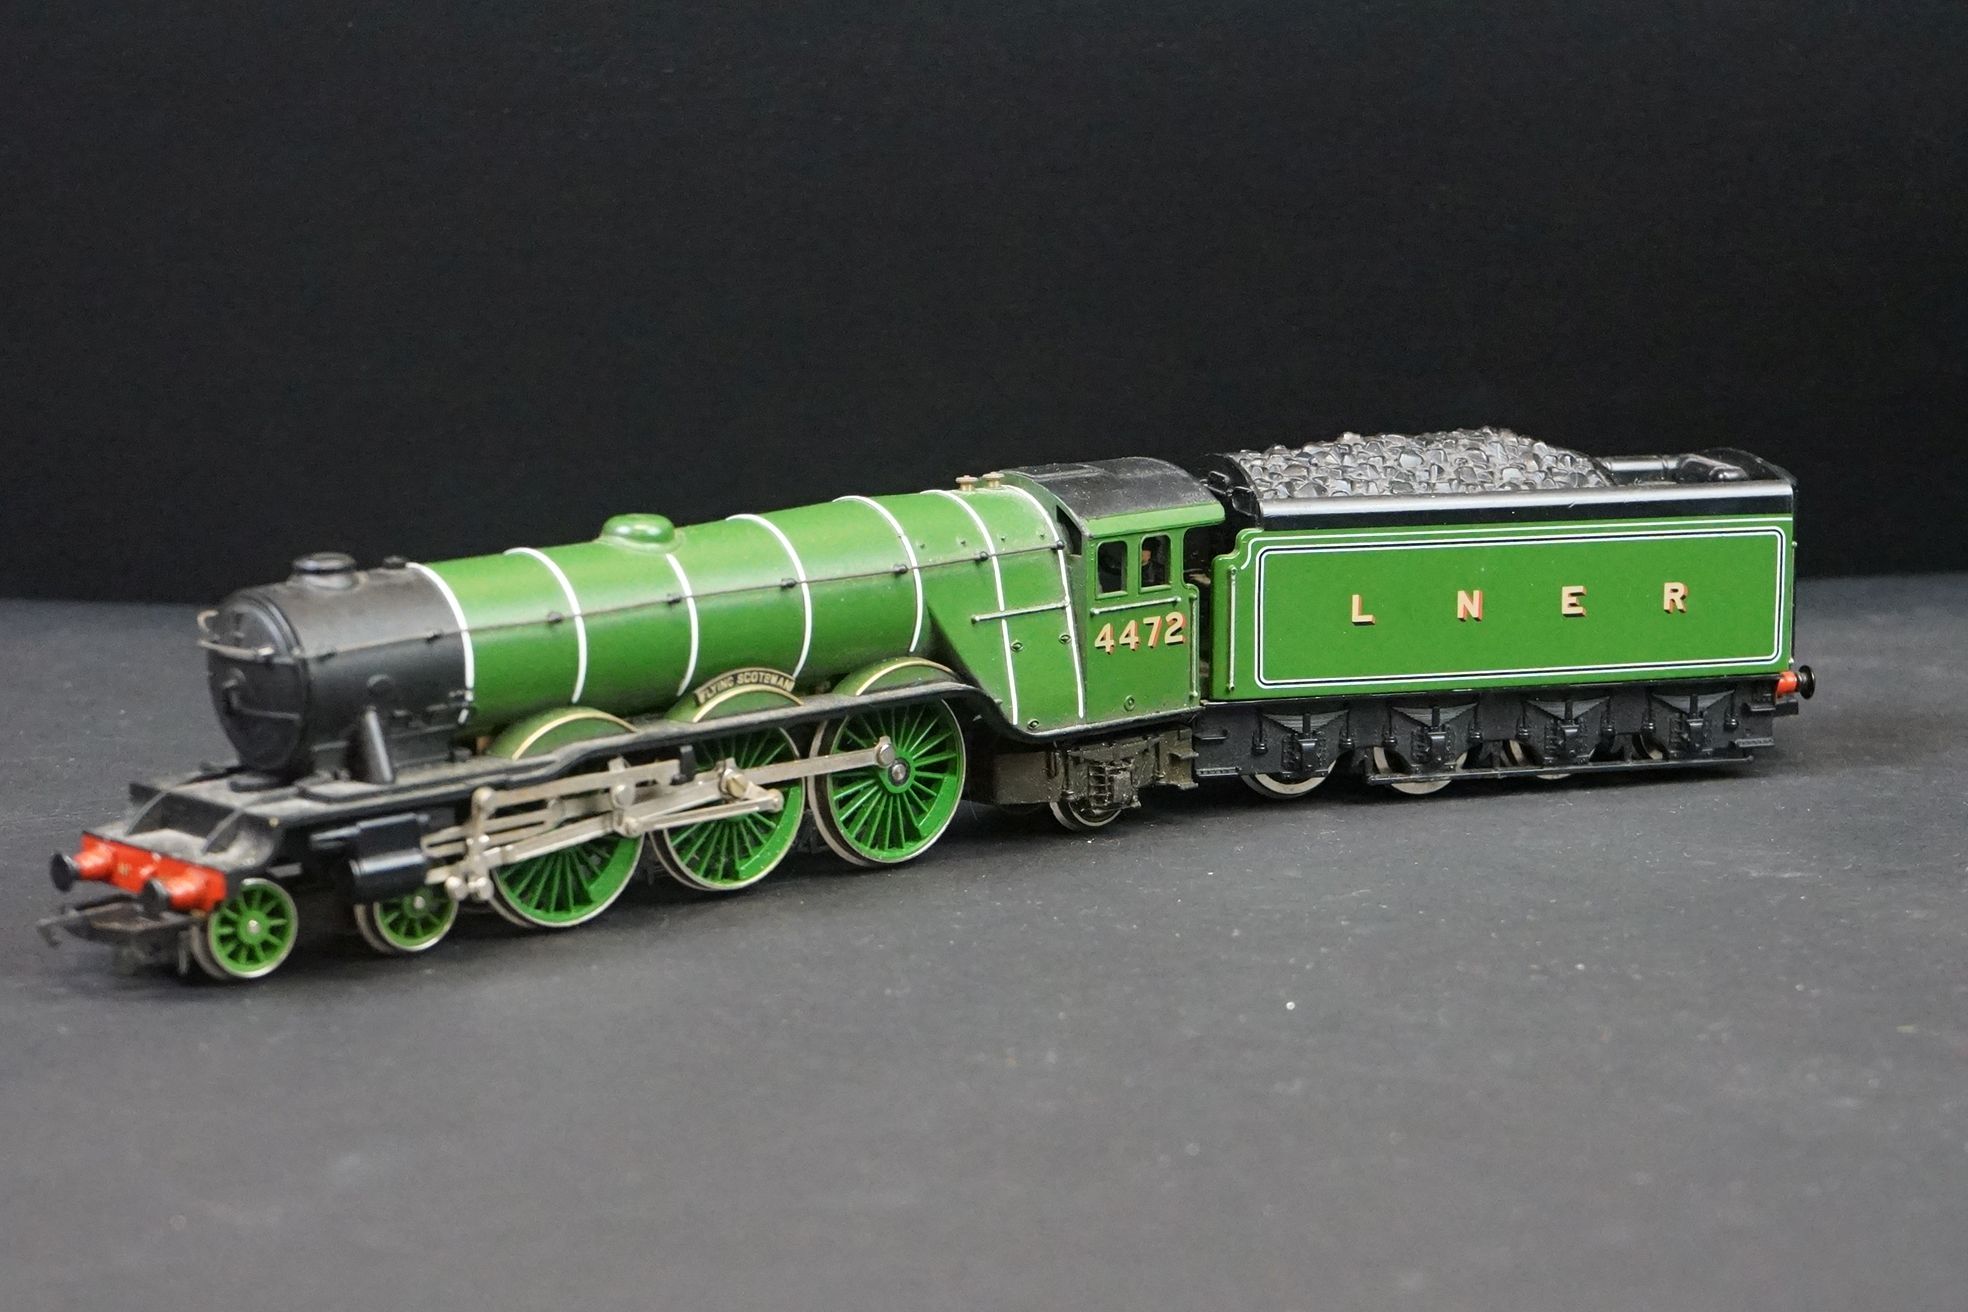 13 OO gauge locomotives to include Hornby, Lima & Airfix featuring Hornby Dublo 2-8-0LMS in black, - Image 9 of 12